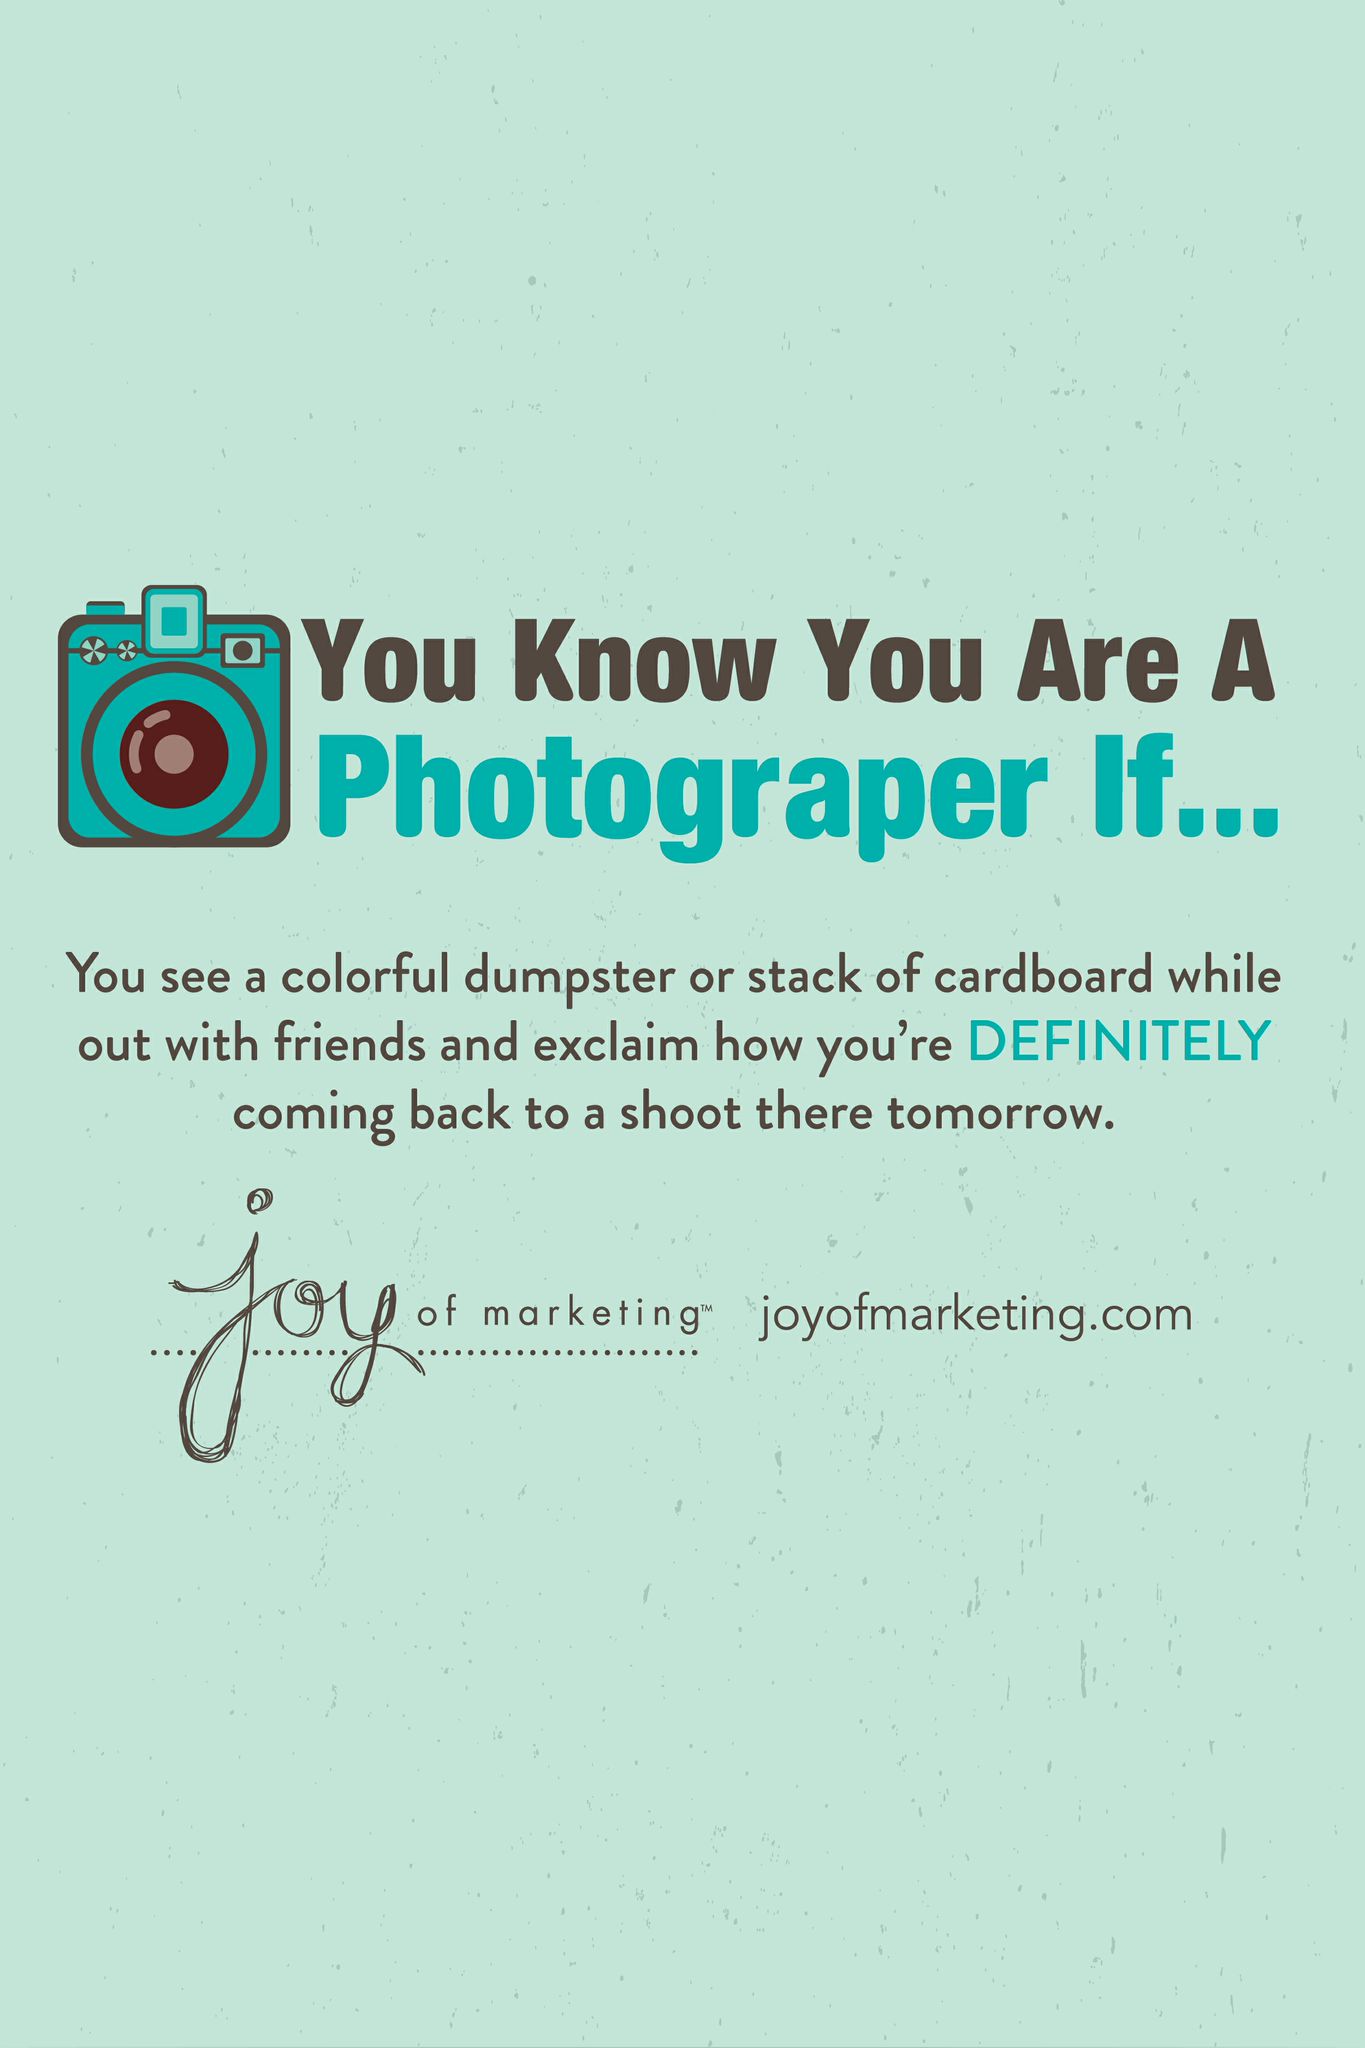 You know you're a photographer if you see a colorful dumpster or stack of cardboard while out with friends and exclaim how you’re definitely coming back to shoot there tomorrow.